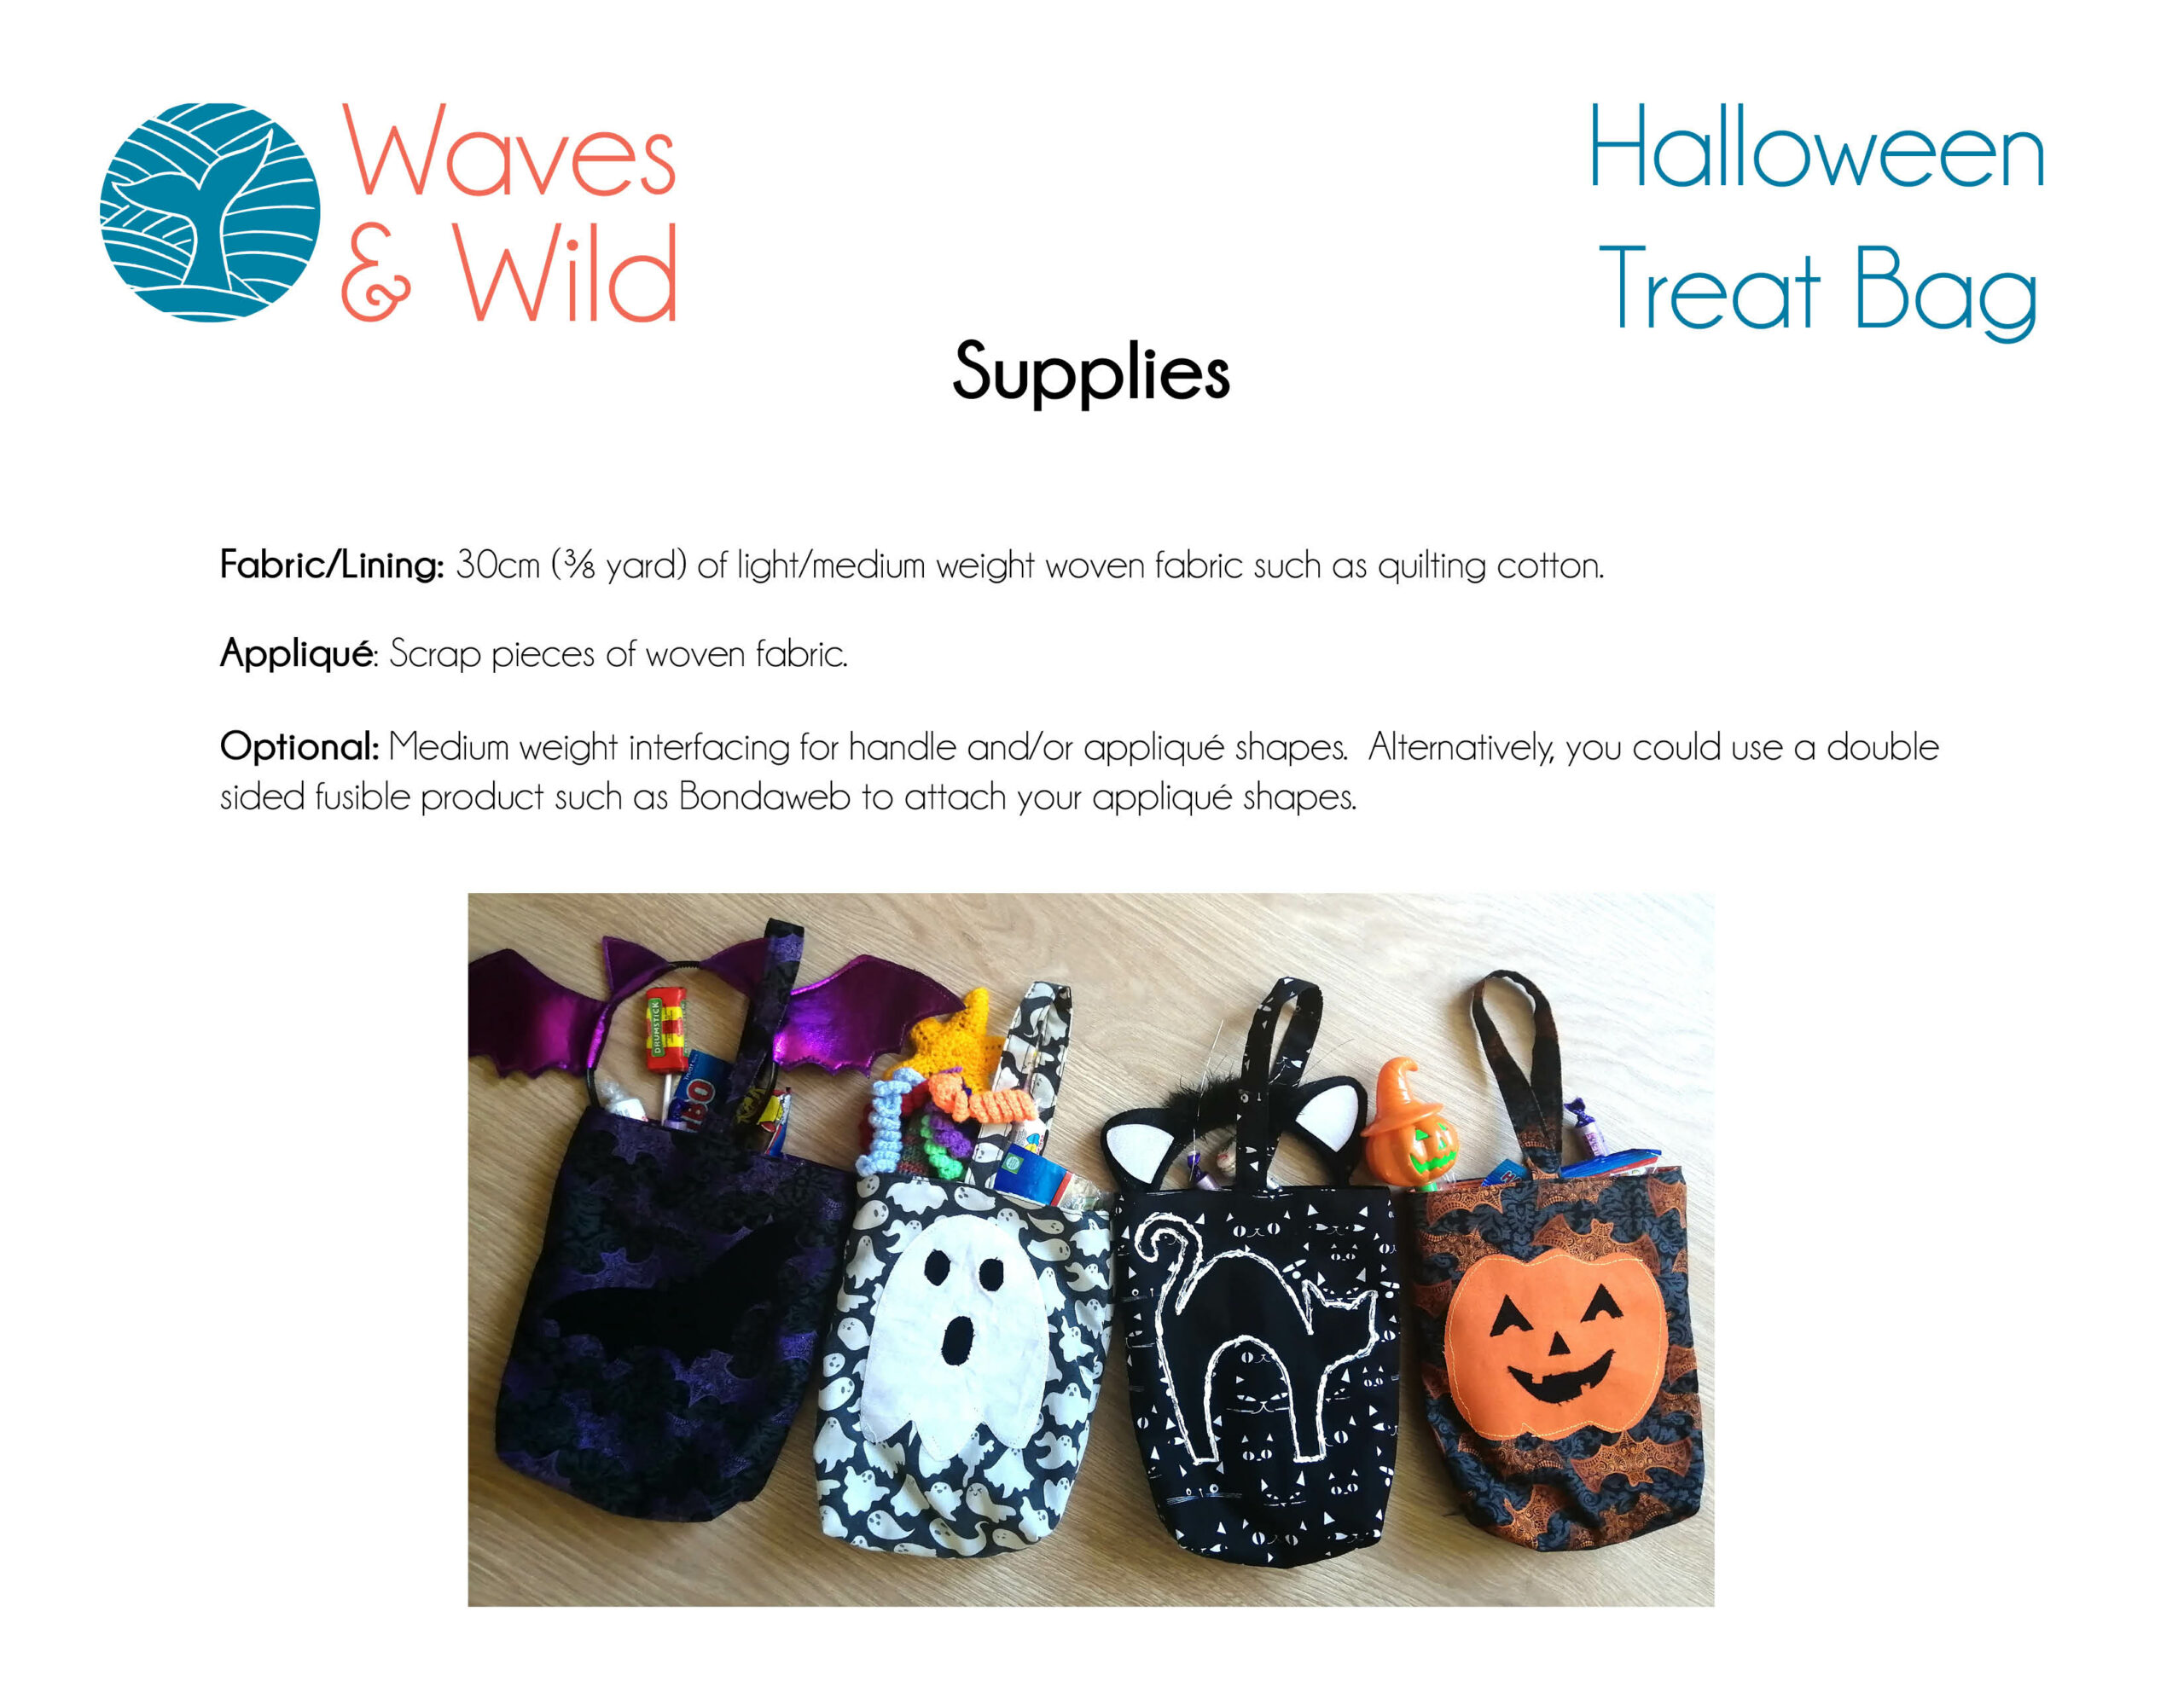 35 Halloween Treat Bag Toppers and Goody Bag Ideas  The TipToe Fairy